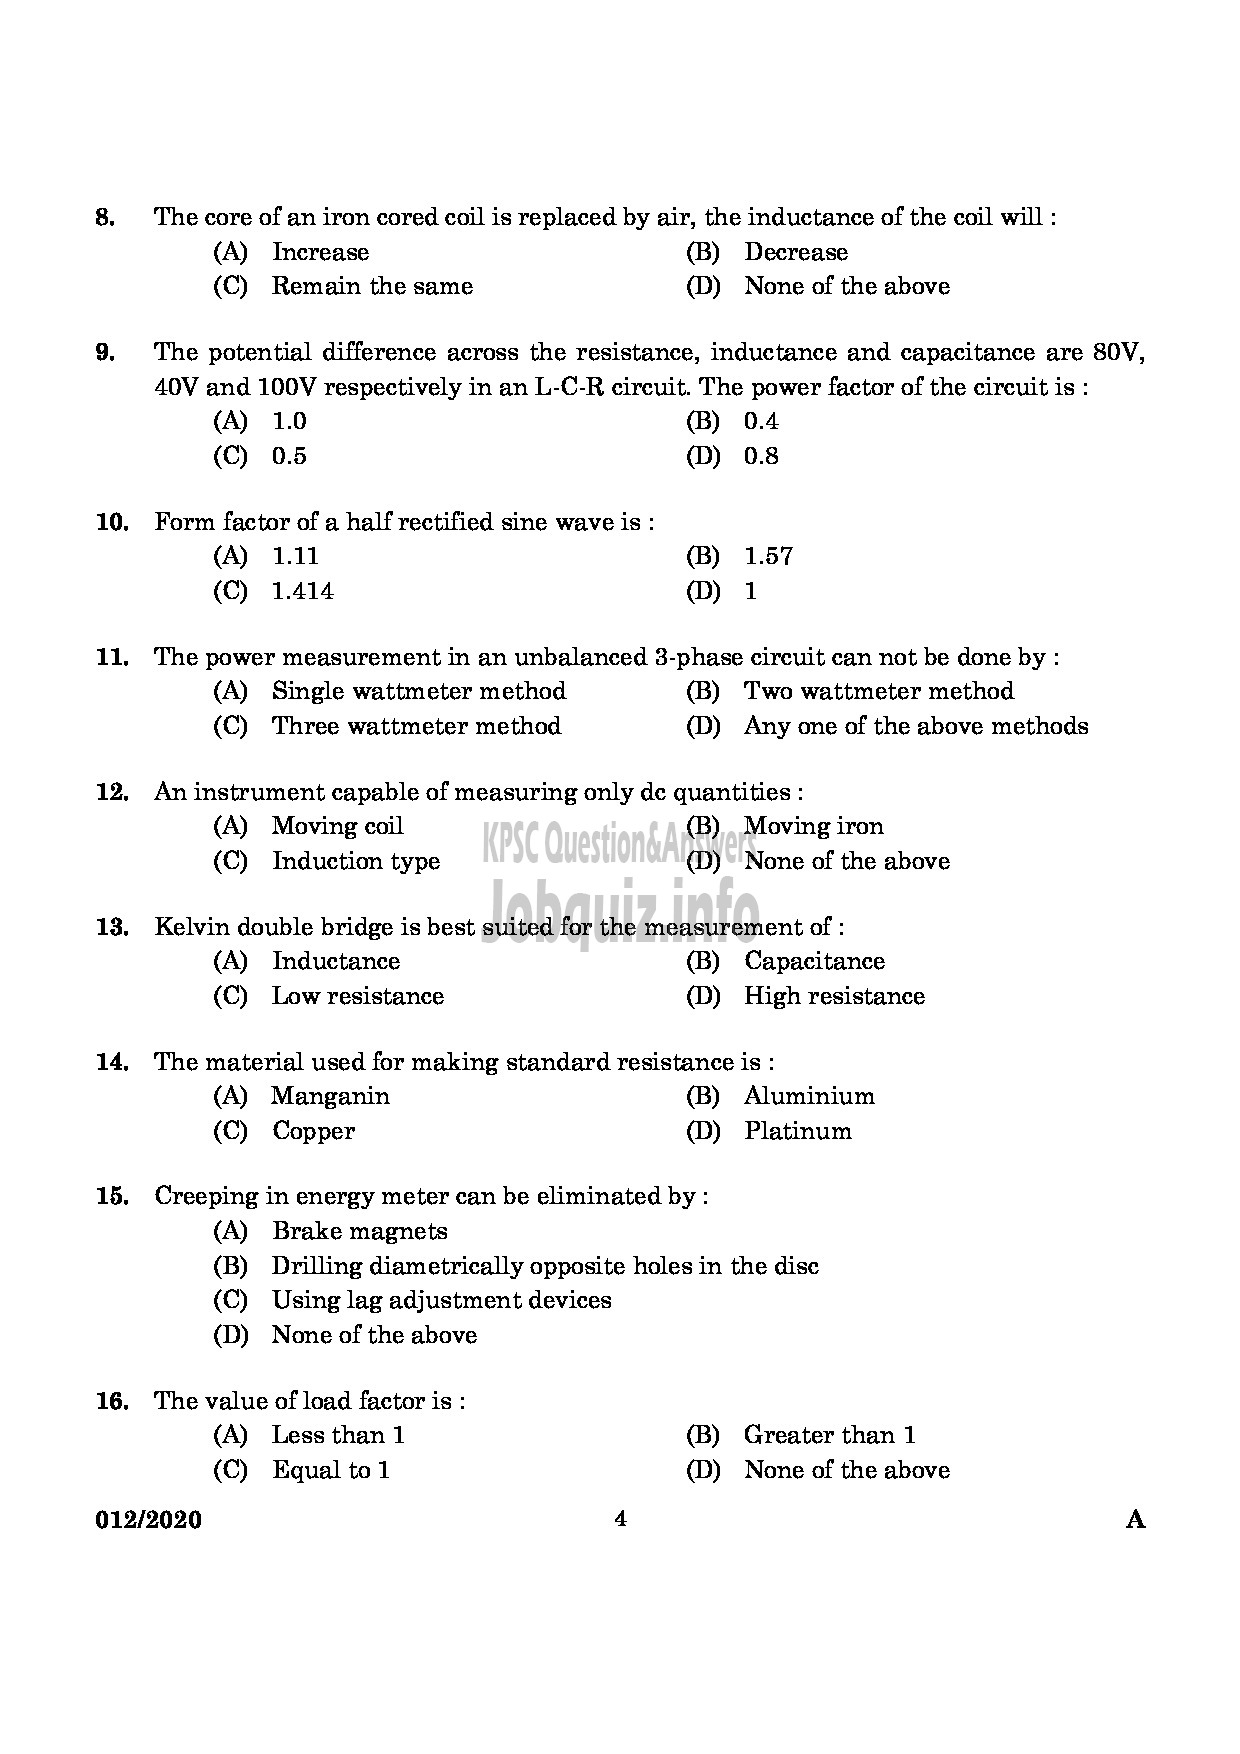 Kerala PSC Question Paper - Technical Superintendent (Engineering) Kerala Co operative Milk Marketing Federation Limited-2